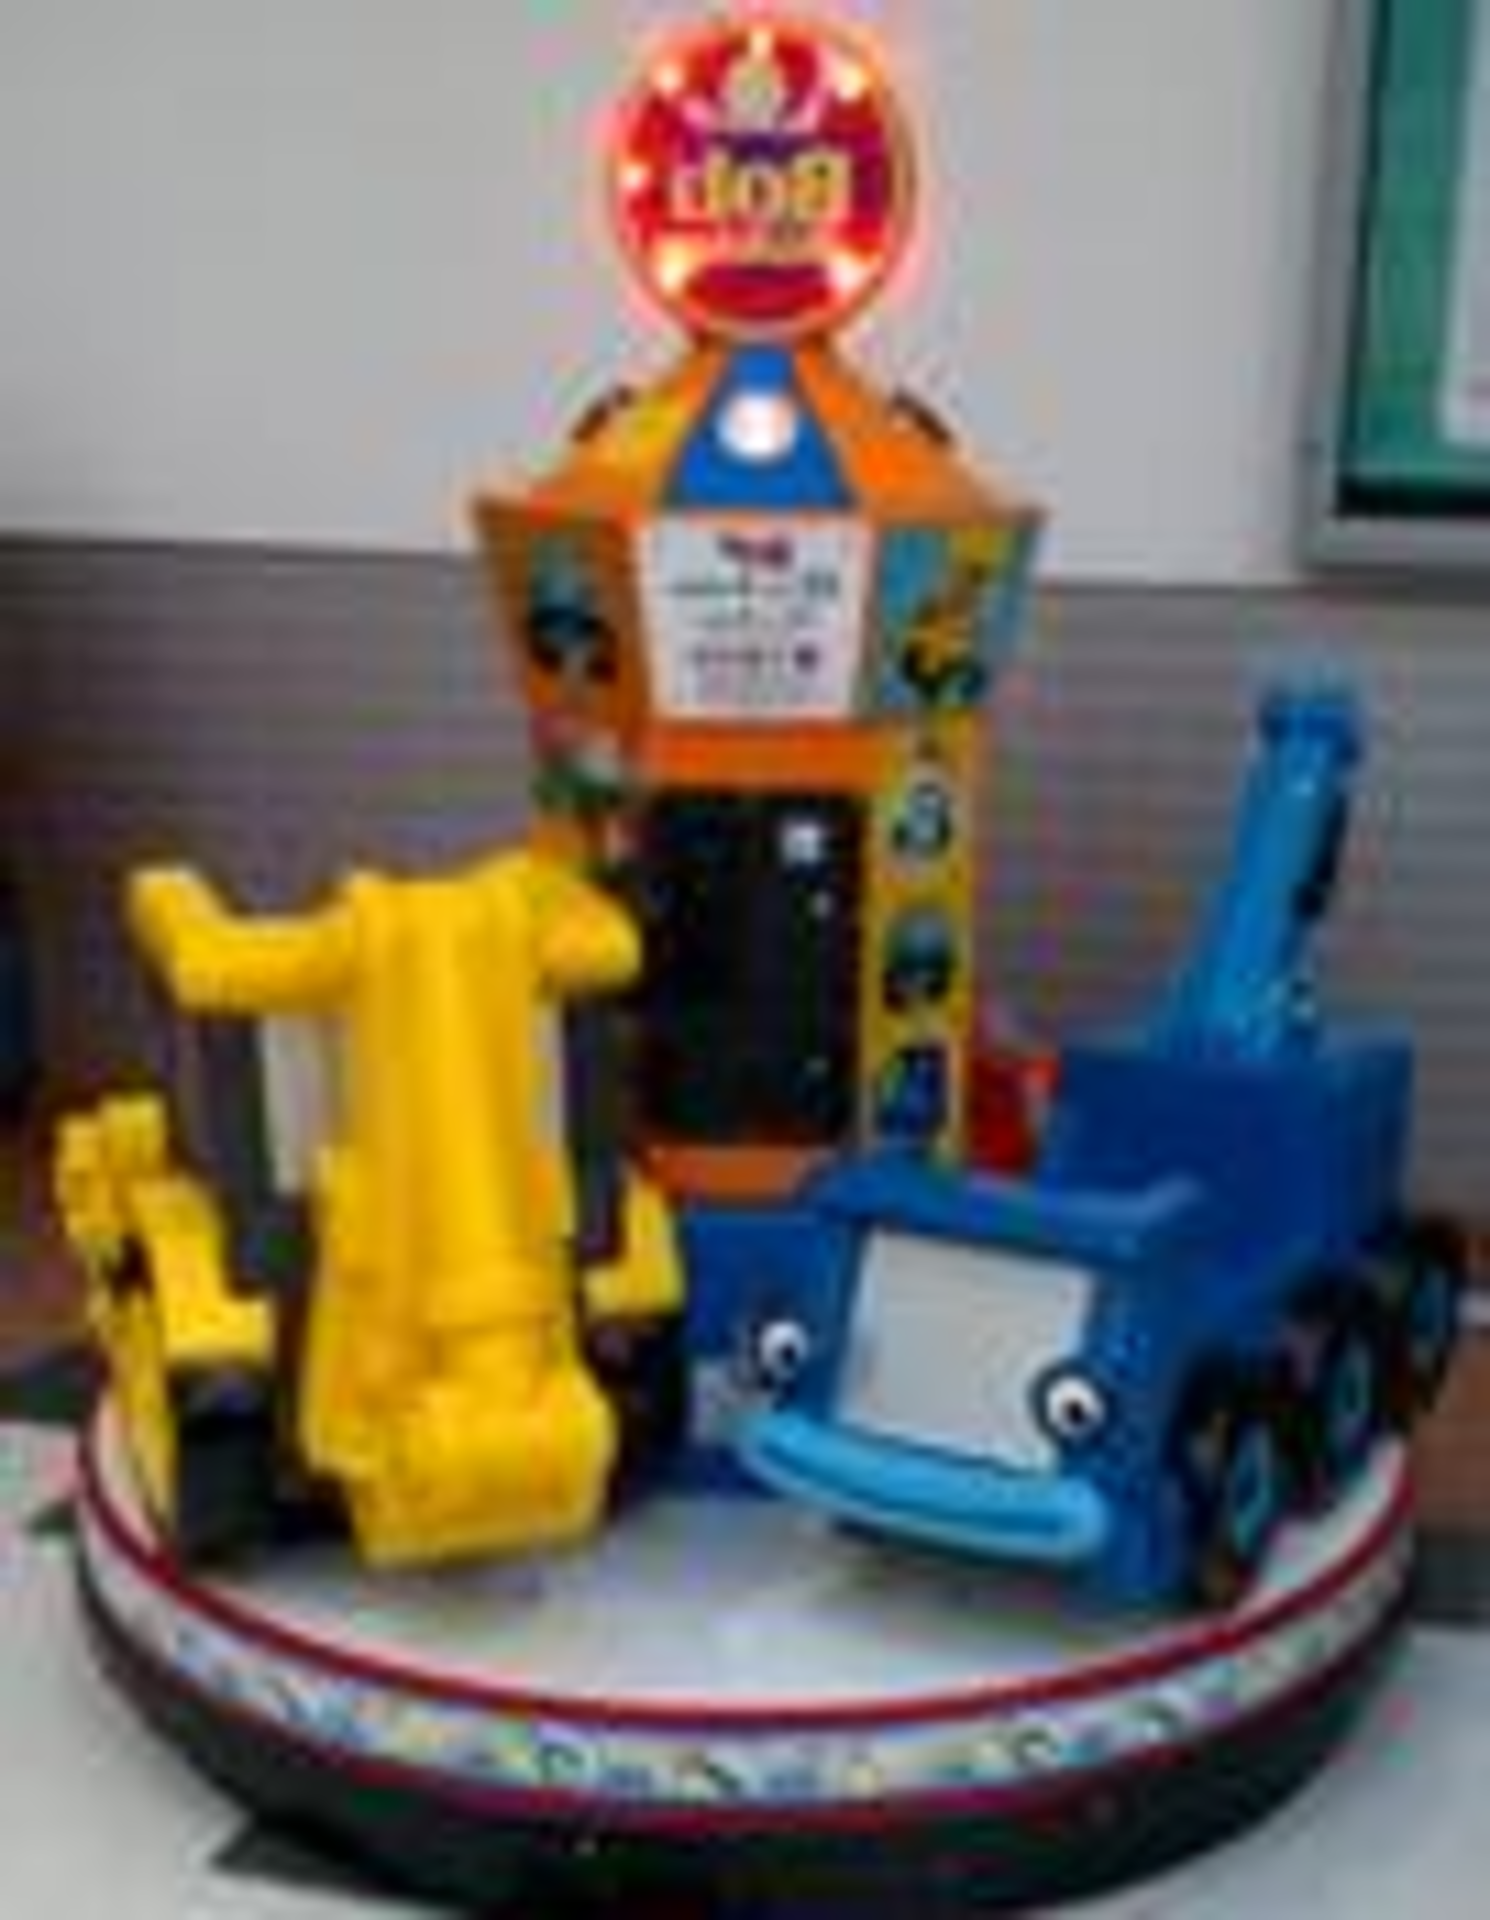 Bob the Builder Carousel Child Ride -sold as seen – Not TestedONLY 12% BUYERS PREMIUM ON THIS ITEM